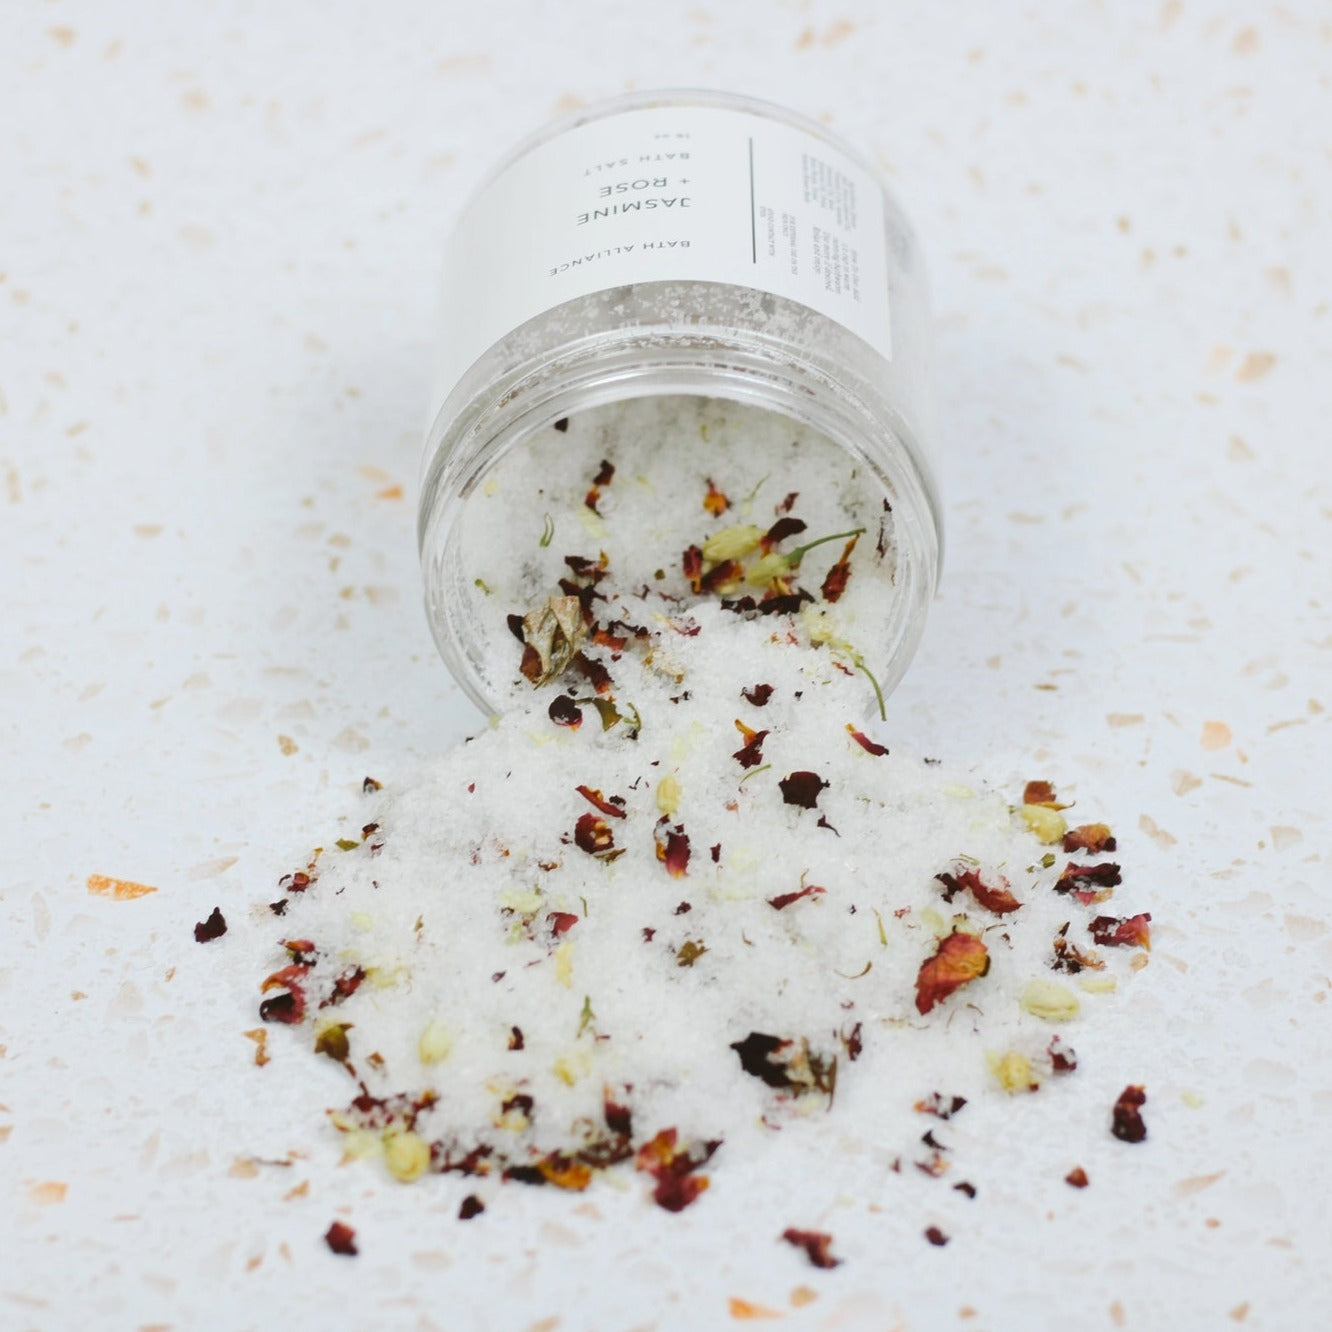 Bath salt jar turned on side, with bath salt mixture of white salts and pieces of flower petals pouring out.